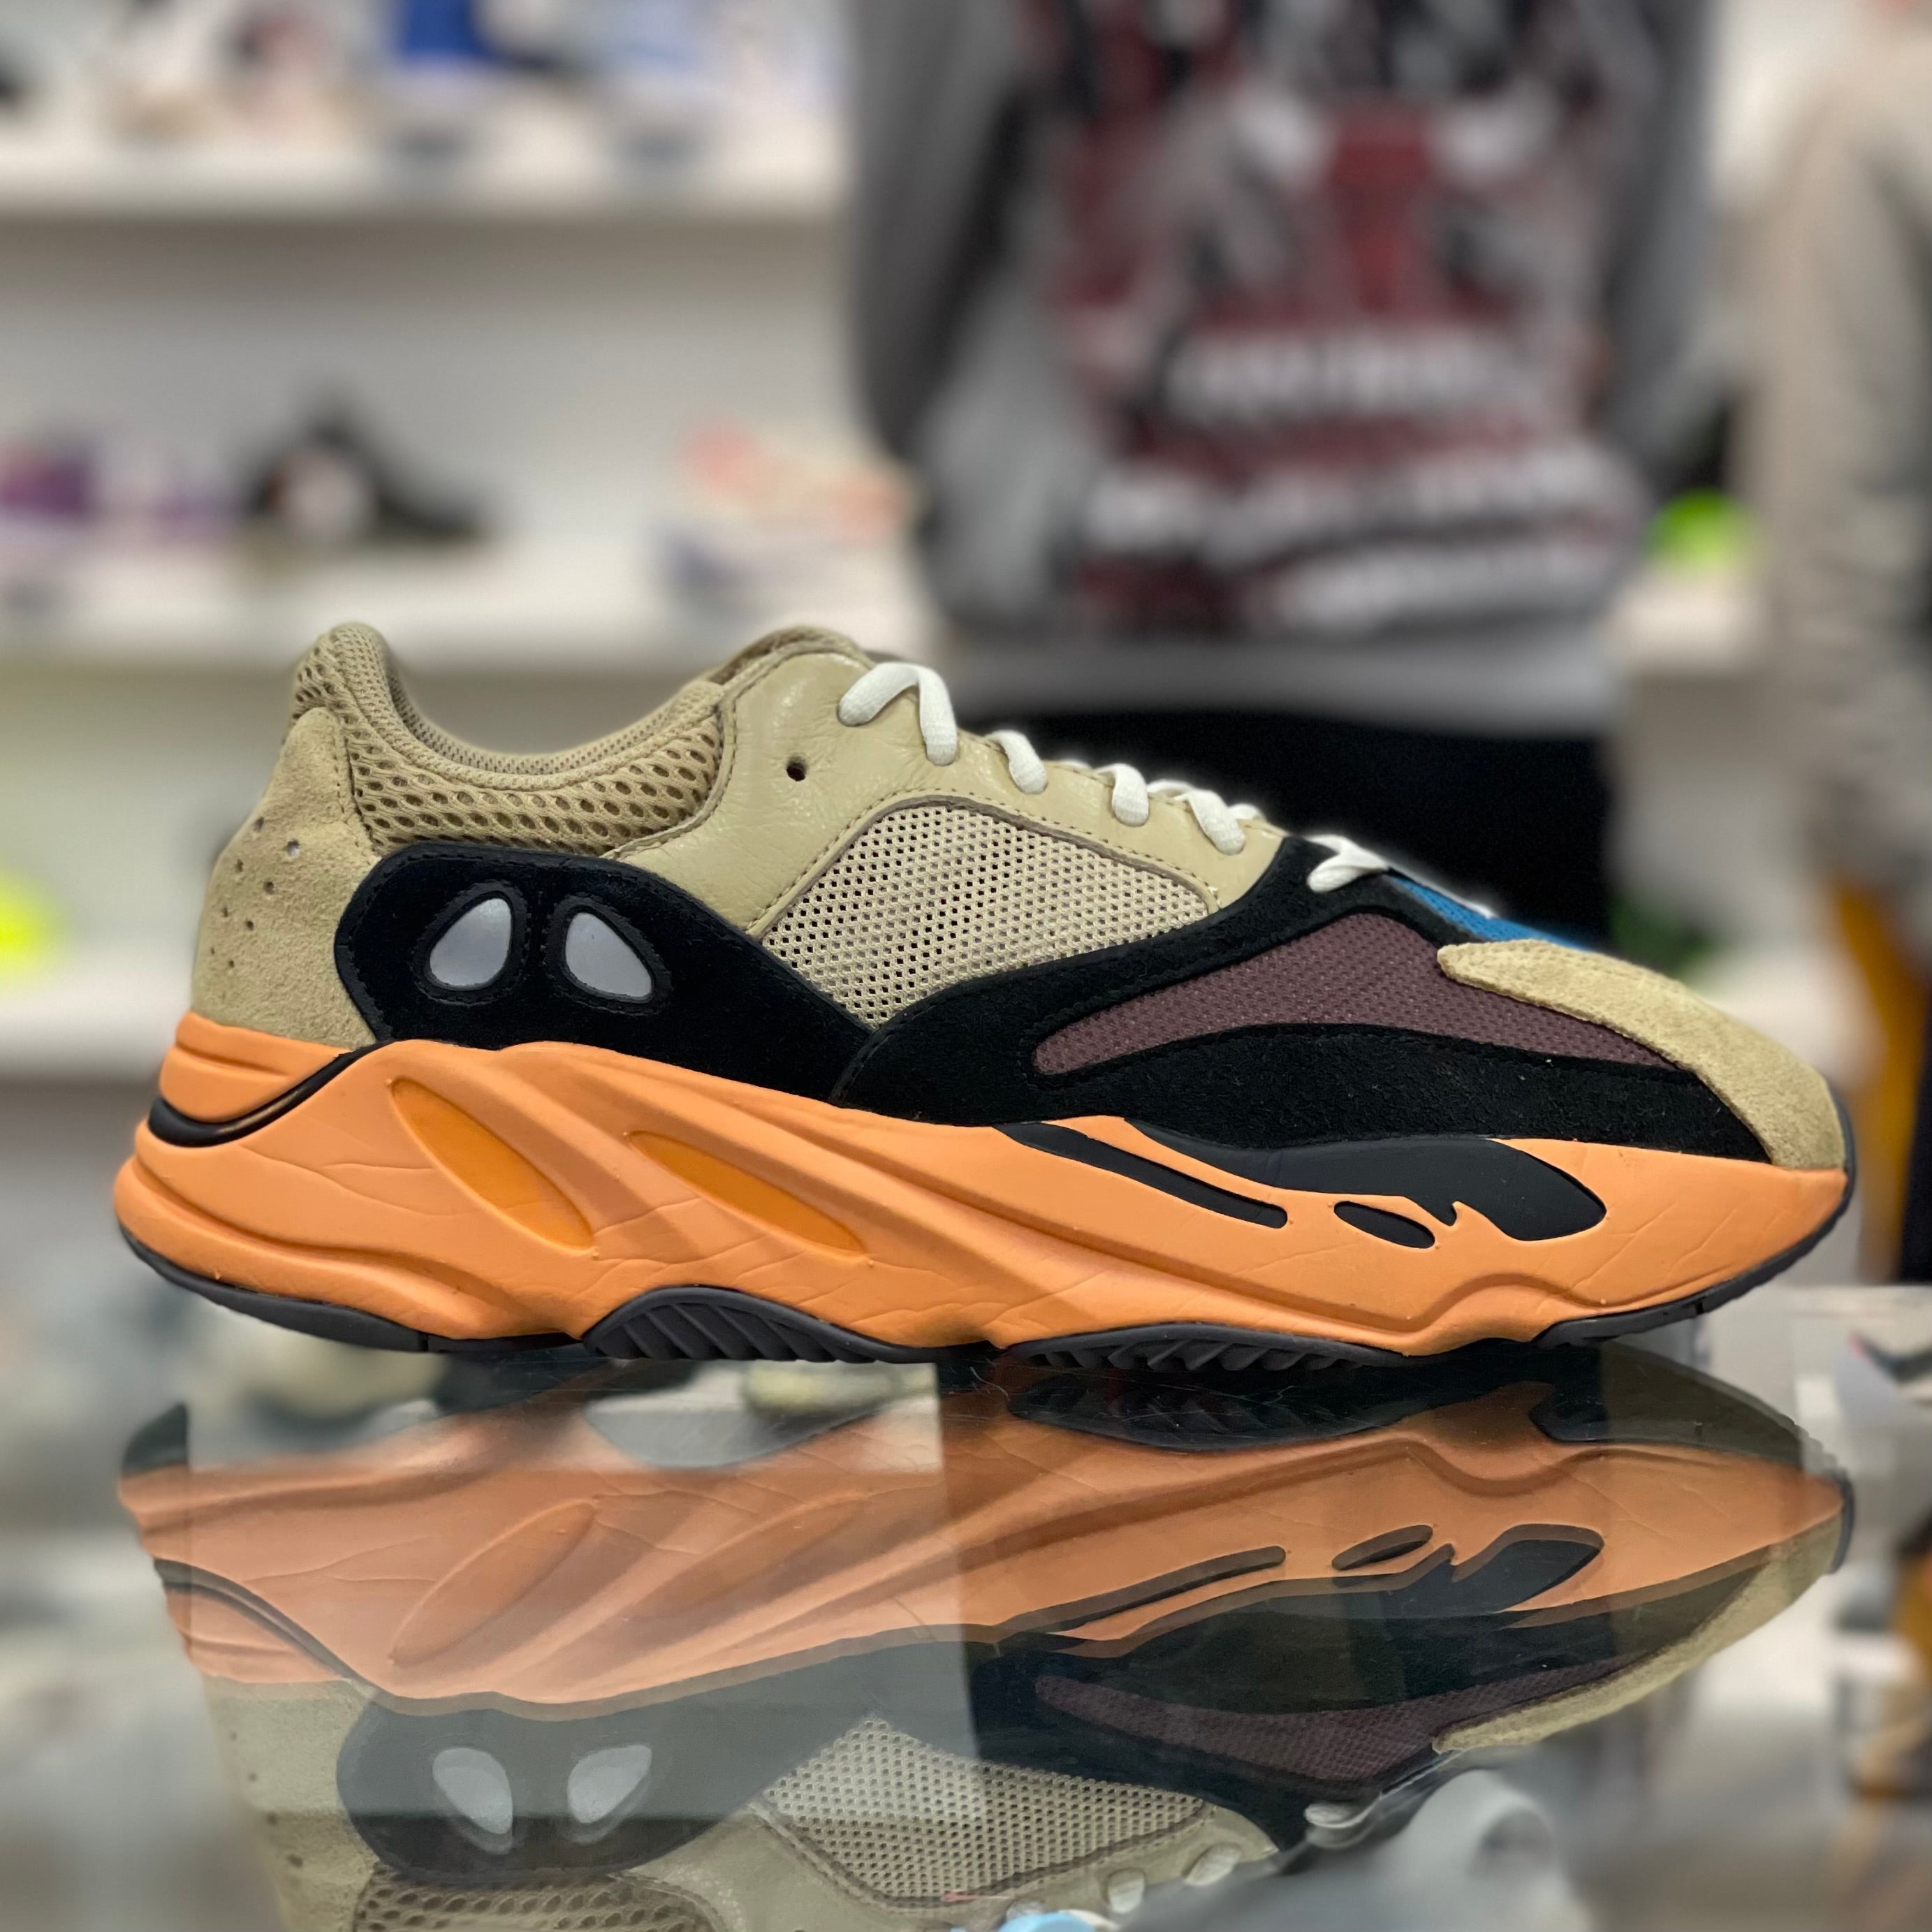 Adidas Yeezy Boost 700 “Enflame”